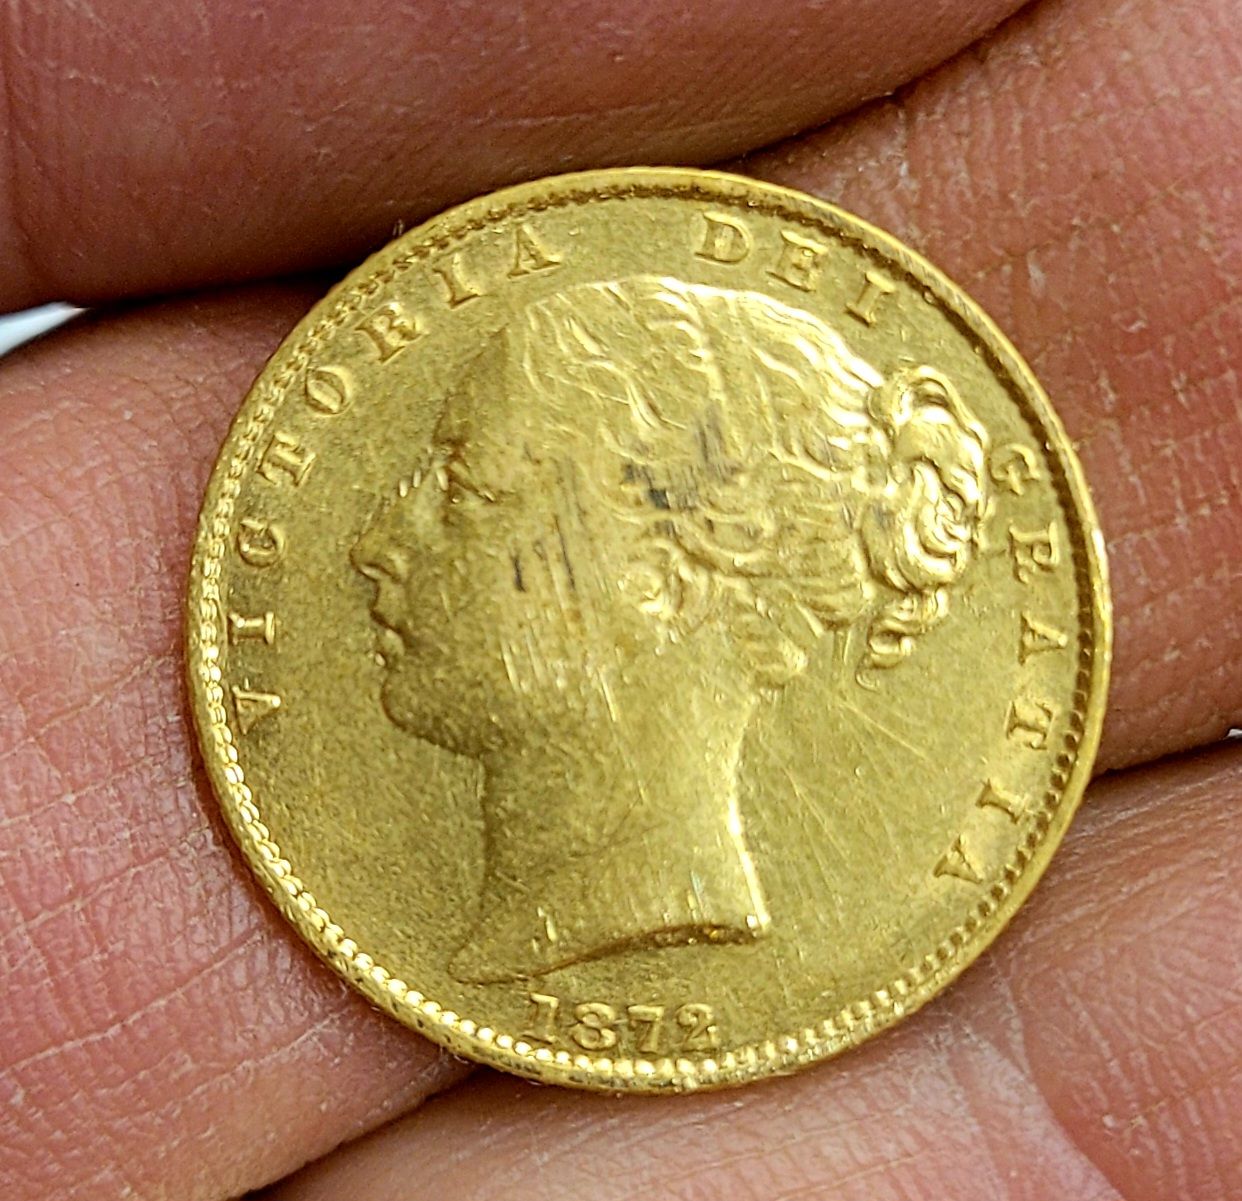 The best day ever! GOLD COIN!